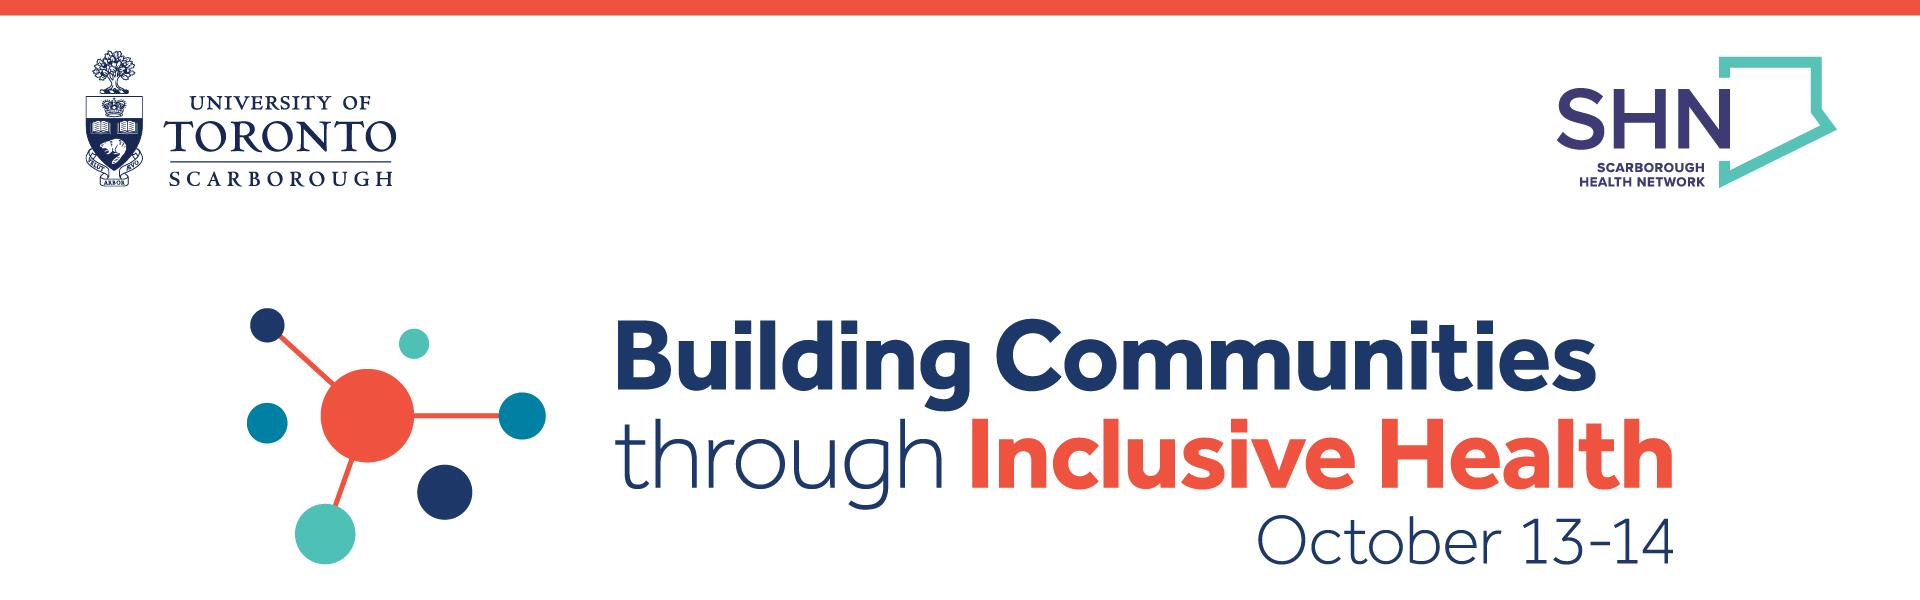 Building Communities through Inclusive Health conference